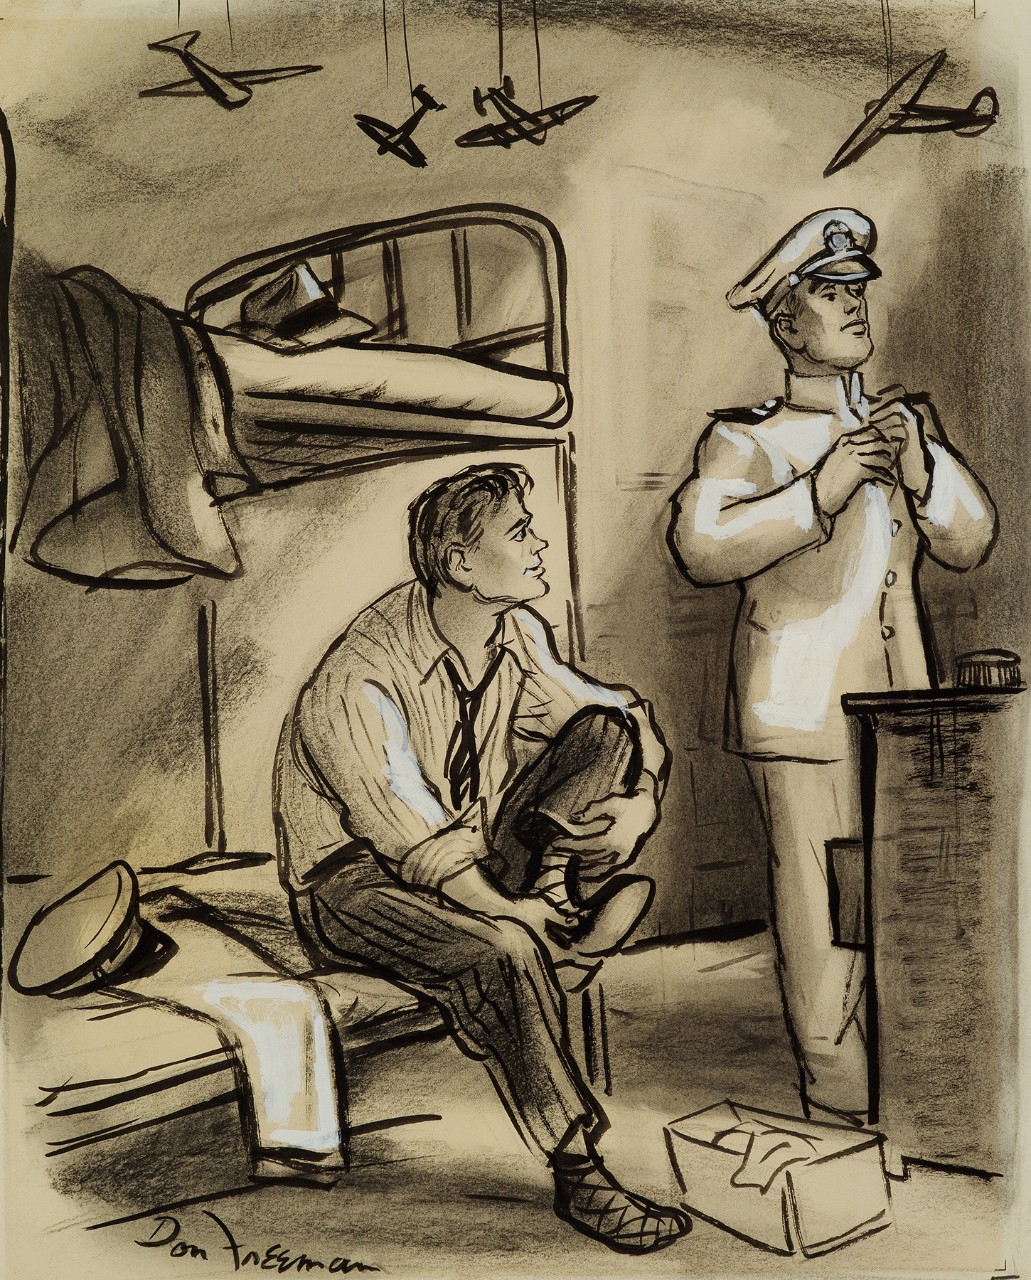 Two men one is seated on the lower bunk in civilian dress the other is looking in the mirror and adjusting his navy uniform